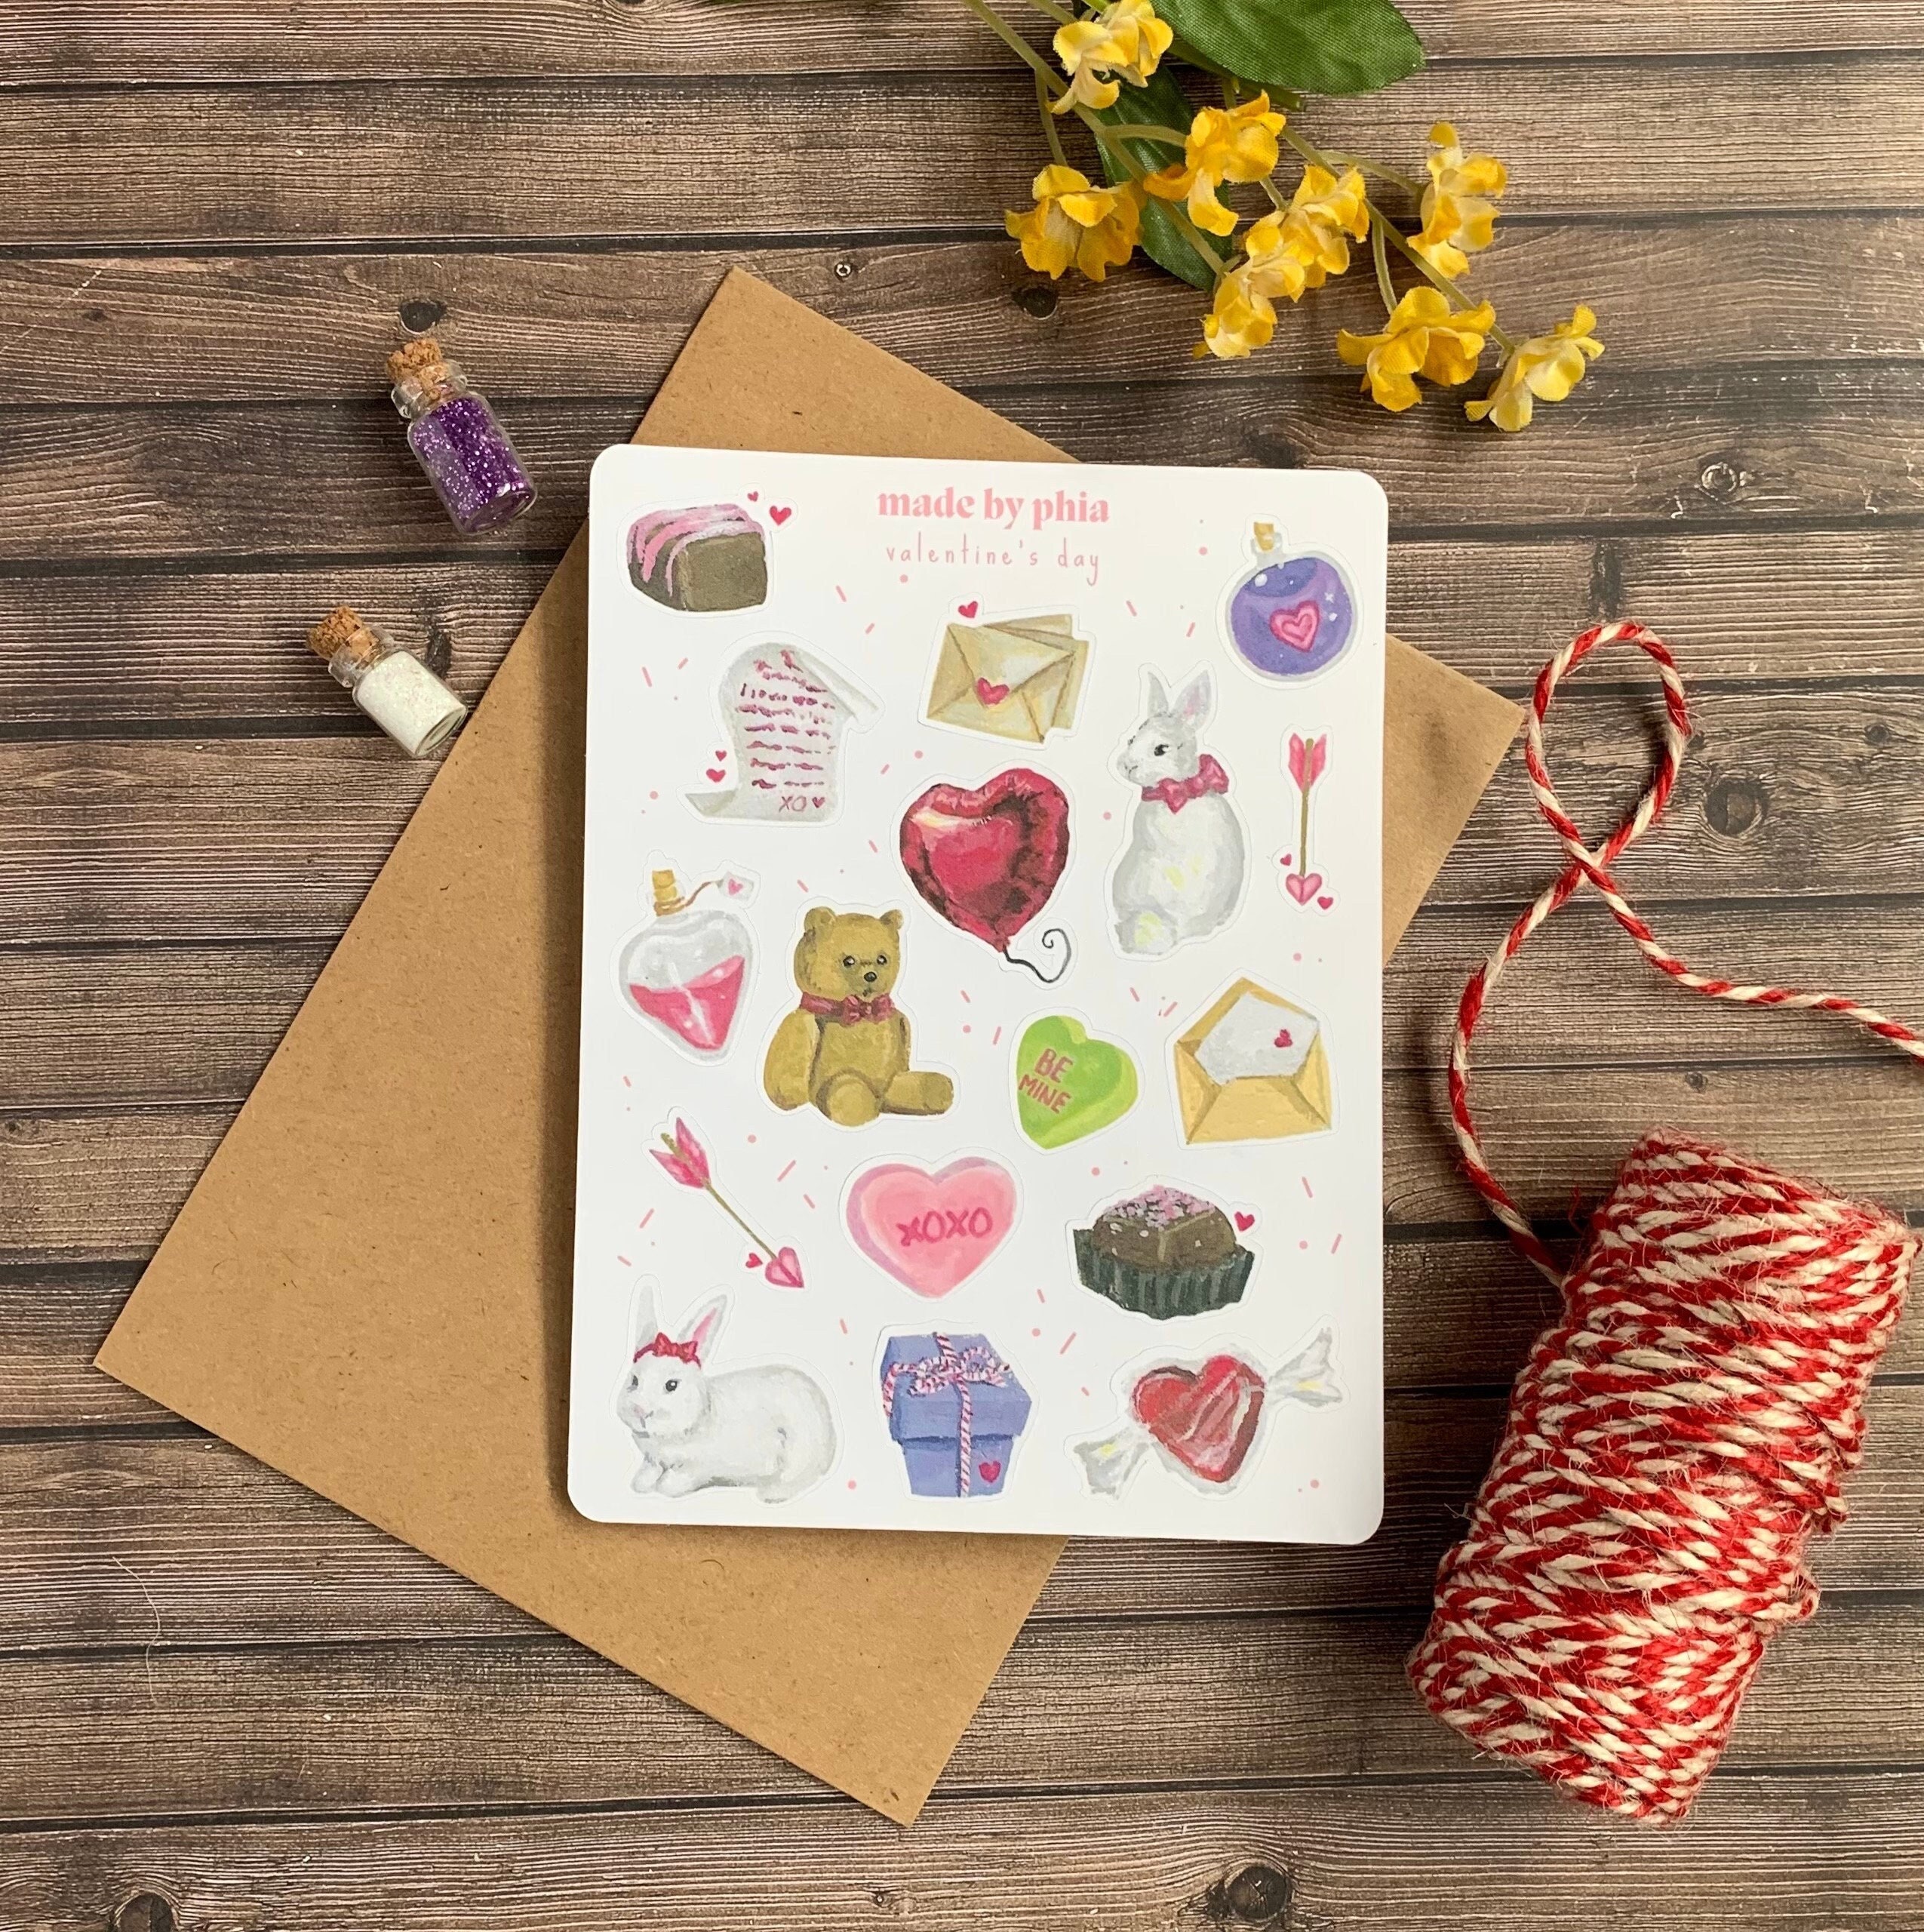 Candy Sticker Sheet, the Sweet Life, Cute Candy Stickers, Stickers for  Planner Journal, Cute Stationary, Kawaii Candy 